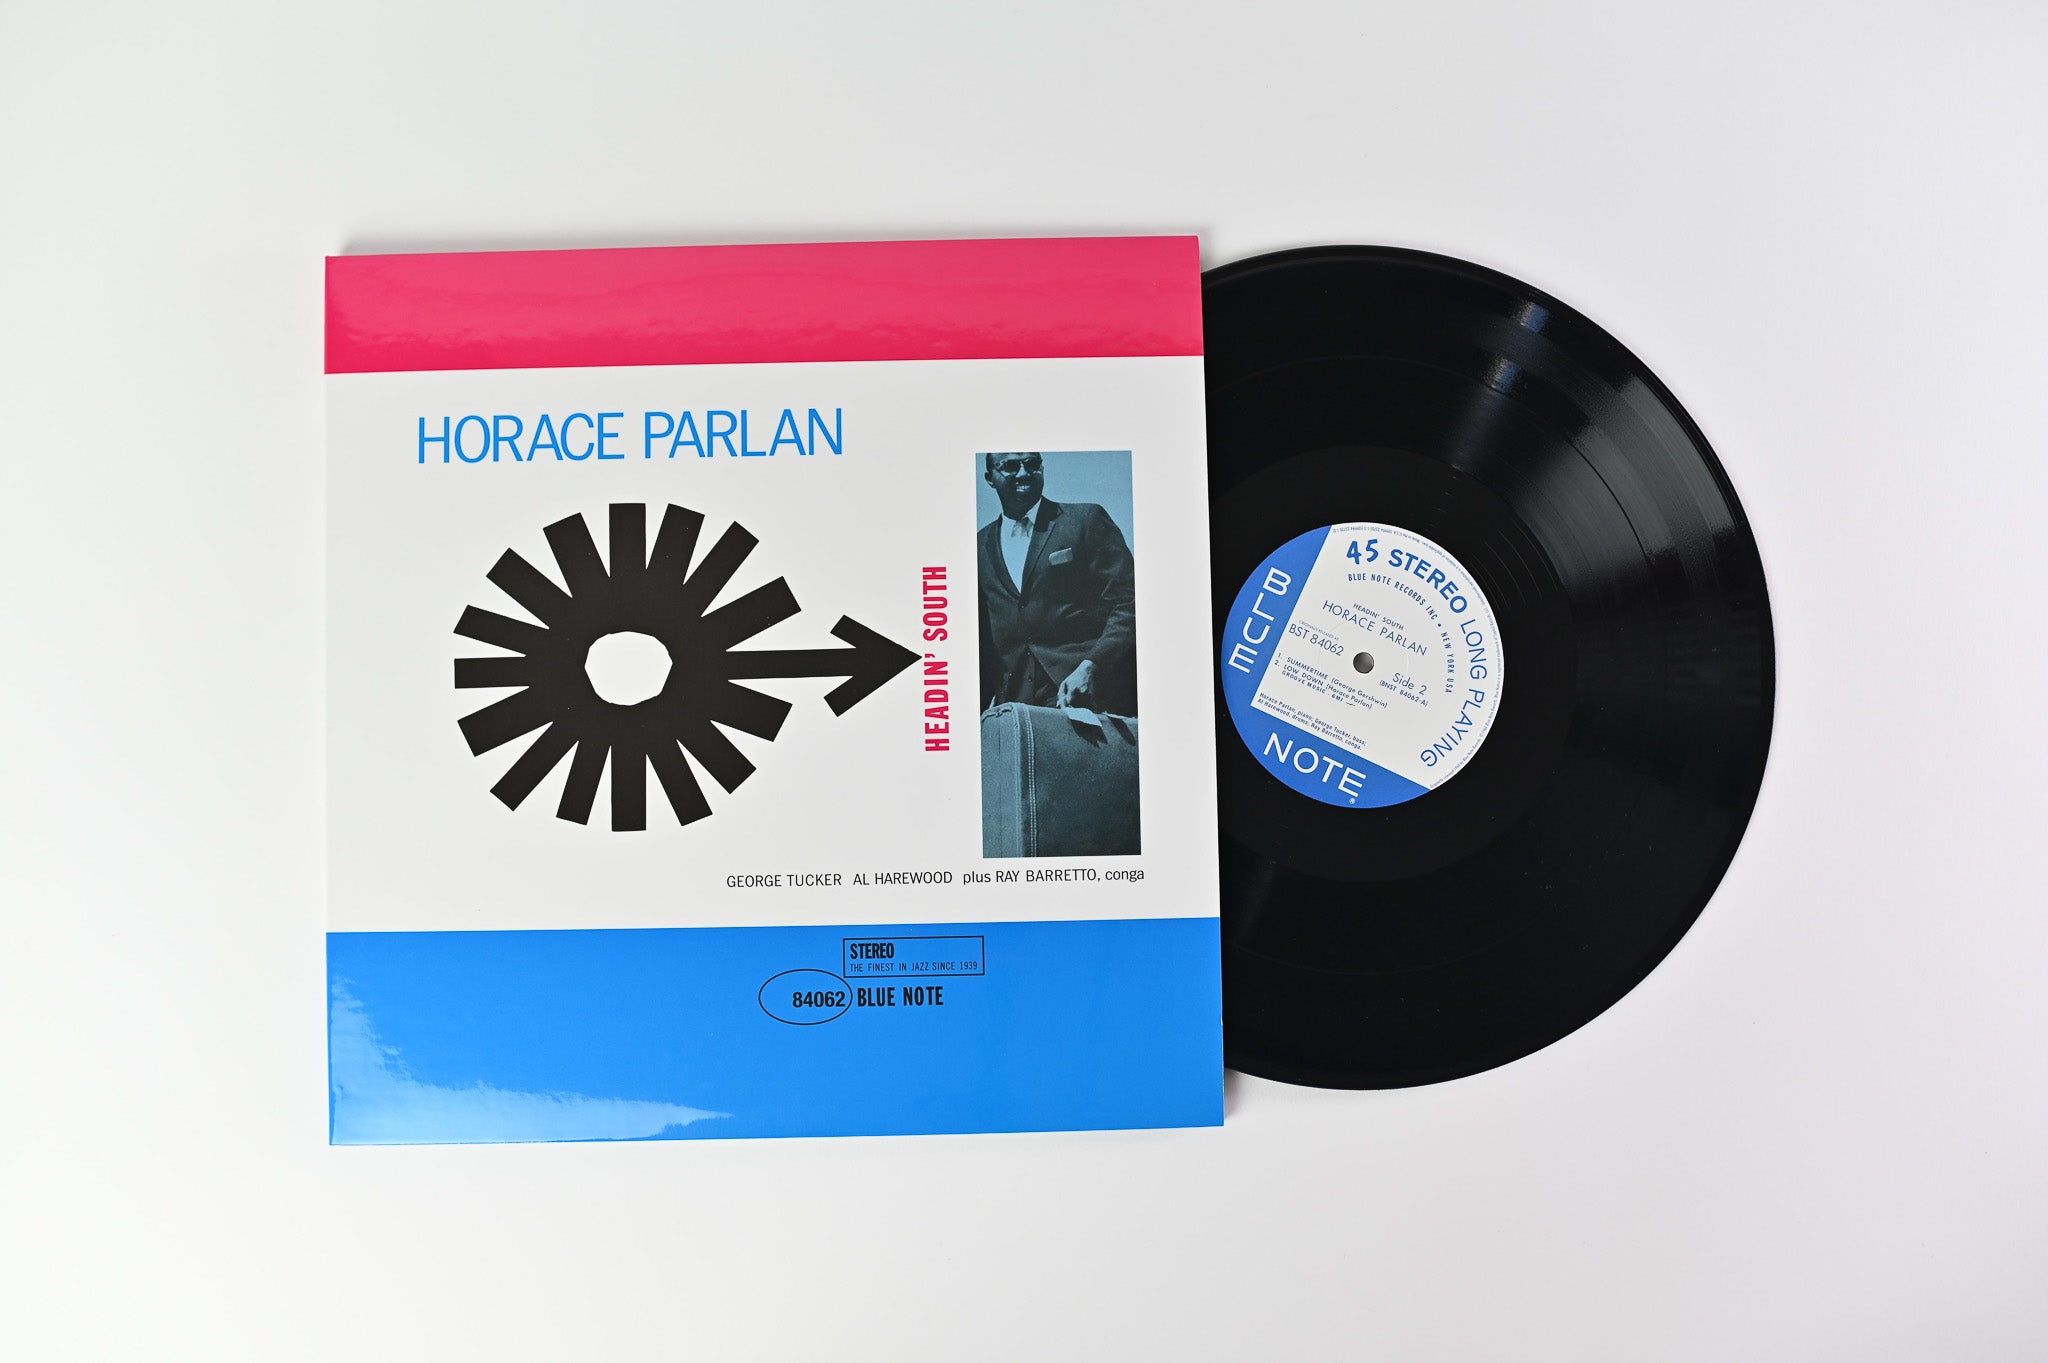 Horace Parlan - Headin' South on Blue Note Music Matters Ltd Reissue Numbered 45 RPM